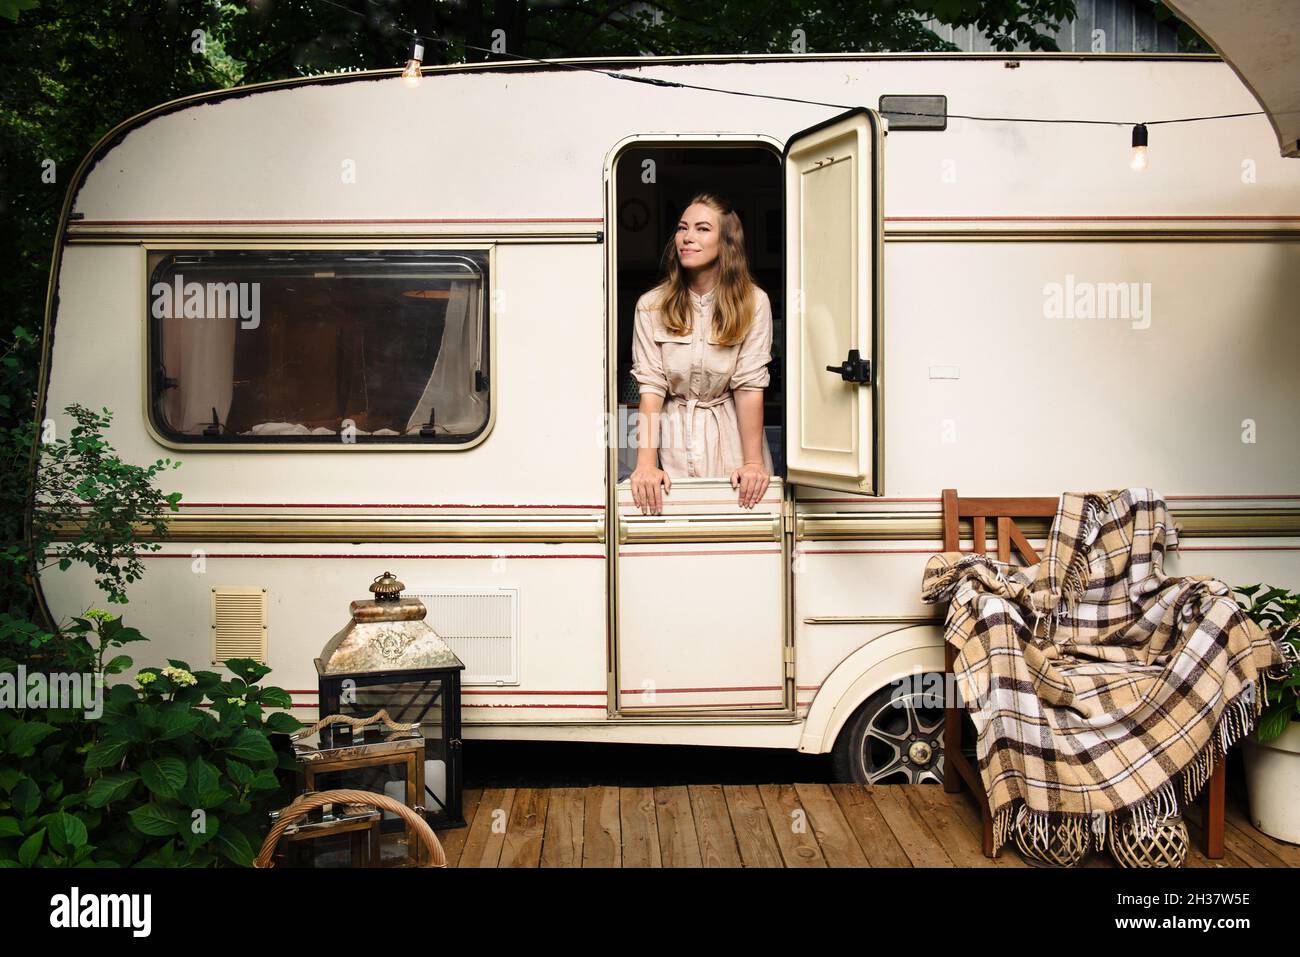 Camping and travelling . Happy person relaxing outdoors near trailer. Woman is ready for road trip Stock Photo